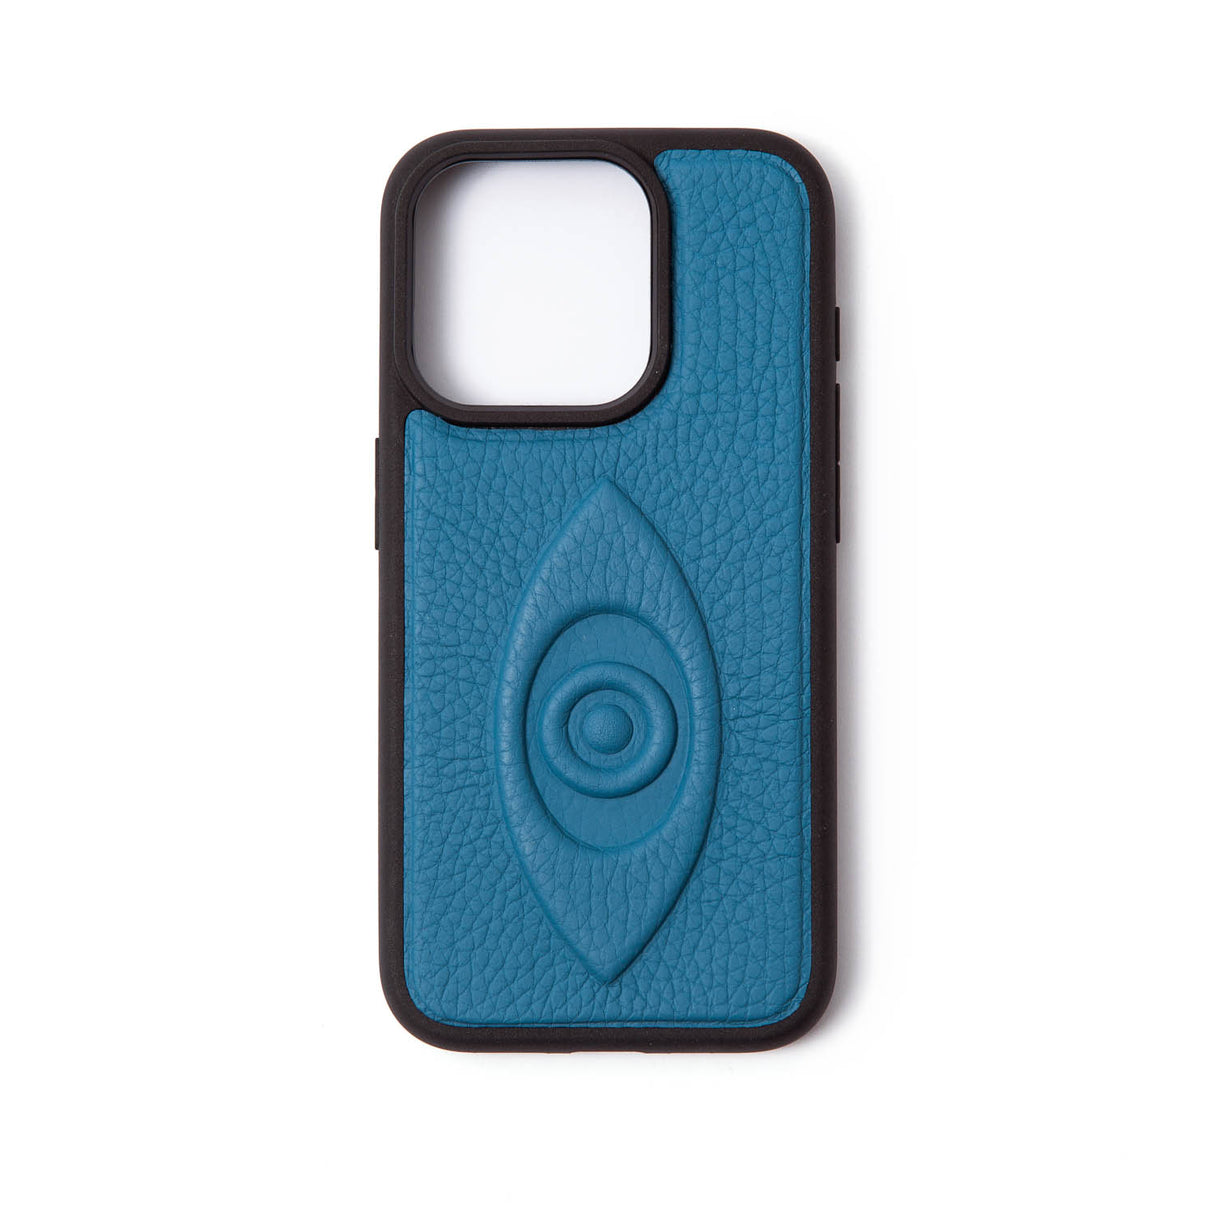 Madame Malachite Talisman Covers - Iphone New talisman phone covers to carry with you to ward off evil eye and protect you. Available in 3 sizes for iPhone 15, 15Pro, 15 Pro Max, 14, 14Pro and 14 ProMax. Lined with our signature malachite lining. 100% Leather